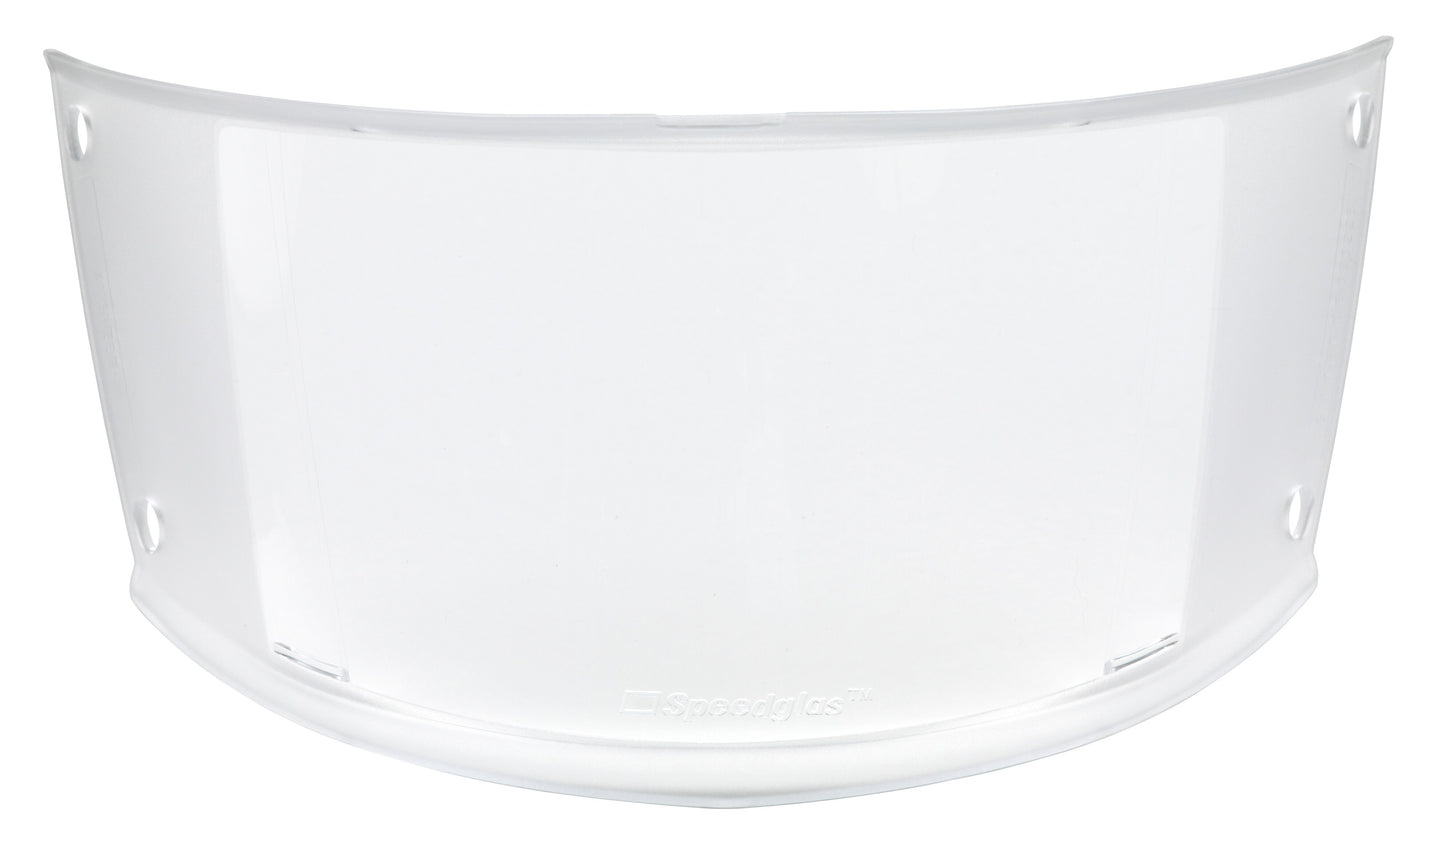 3M™ Speedglas™ Outer Protection Plate, SL, Standard